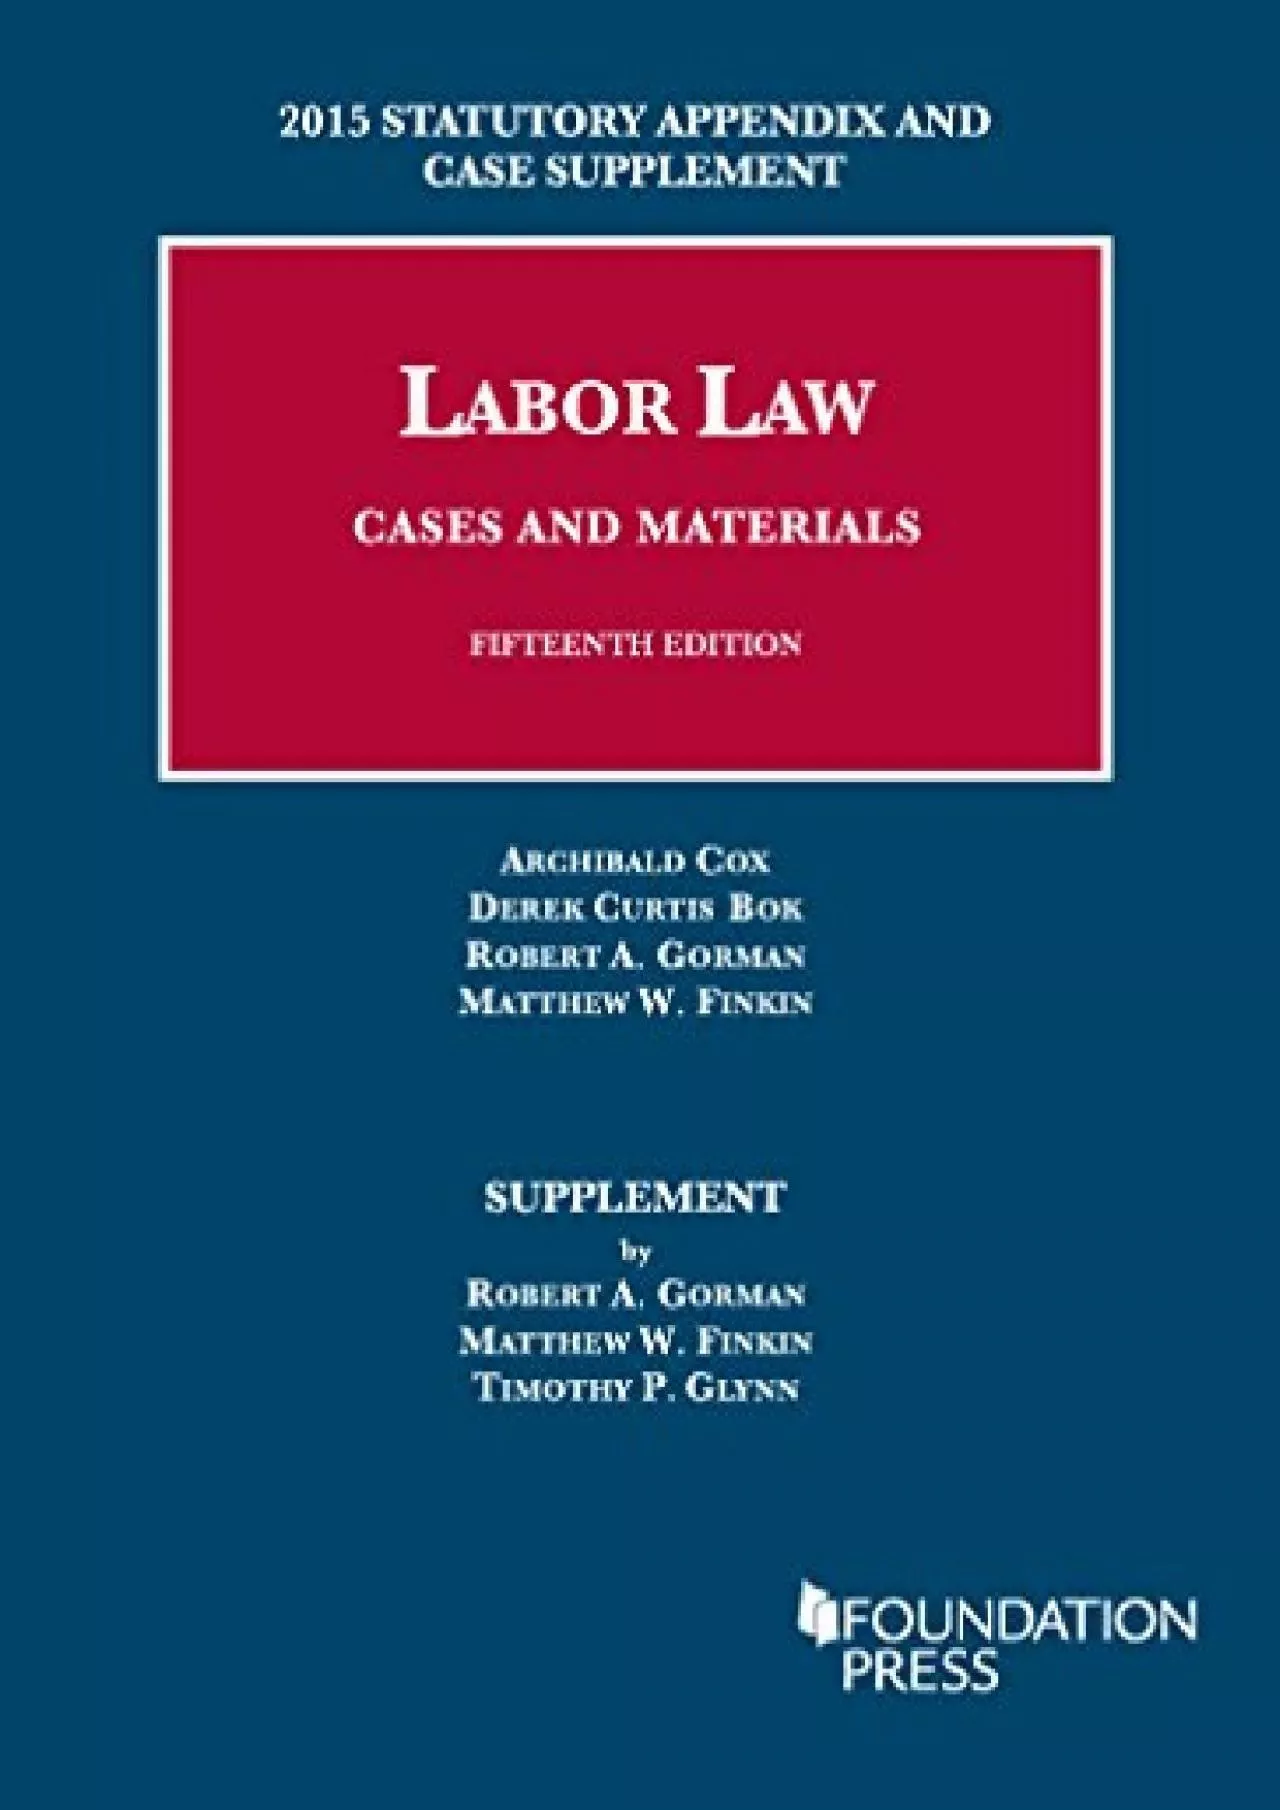 PDF_ Labor Law, Cases and Materials, 15th, 2015 Statutory Appendix and Case